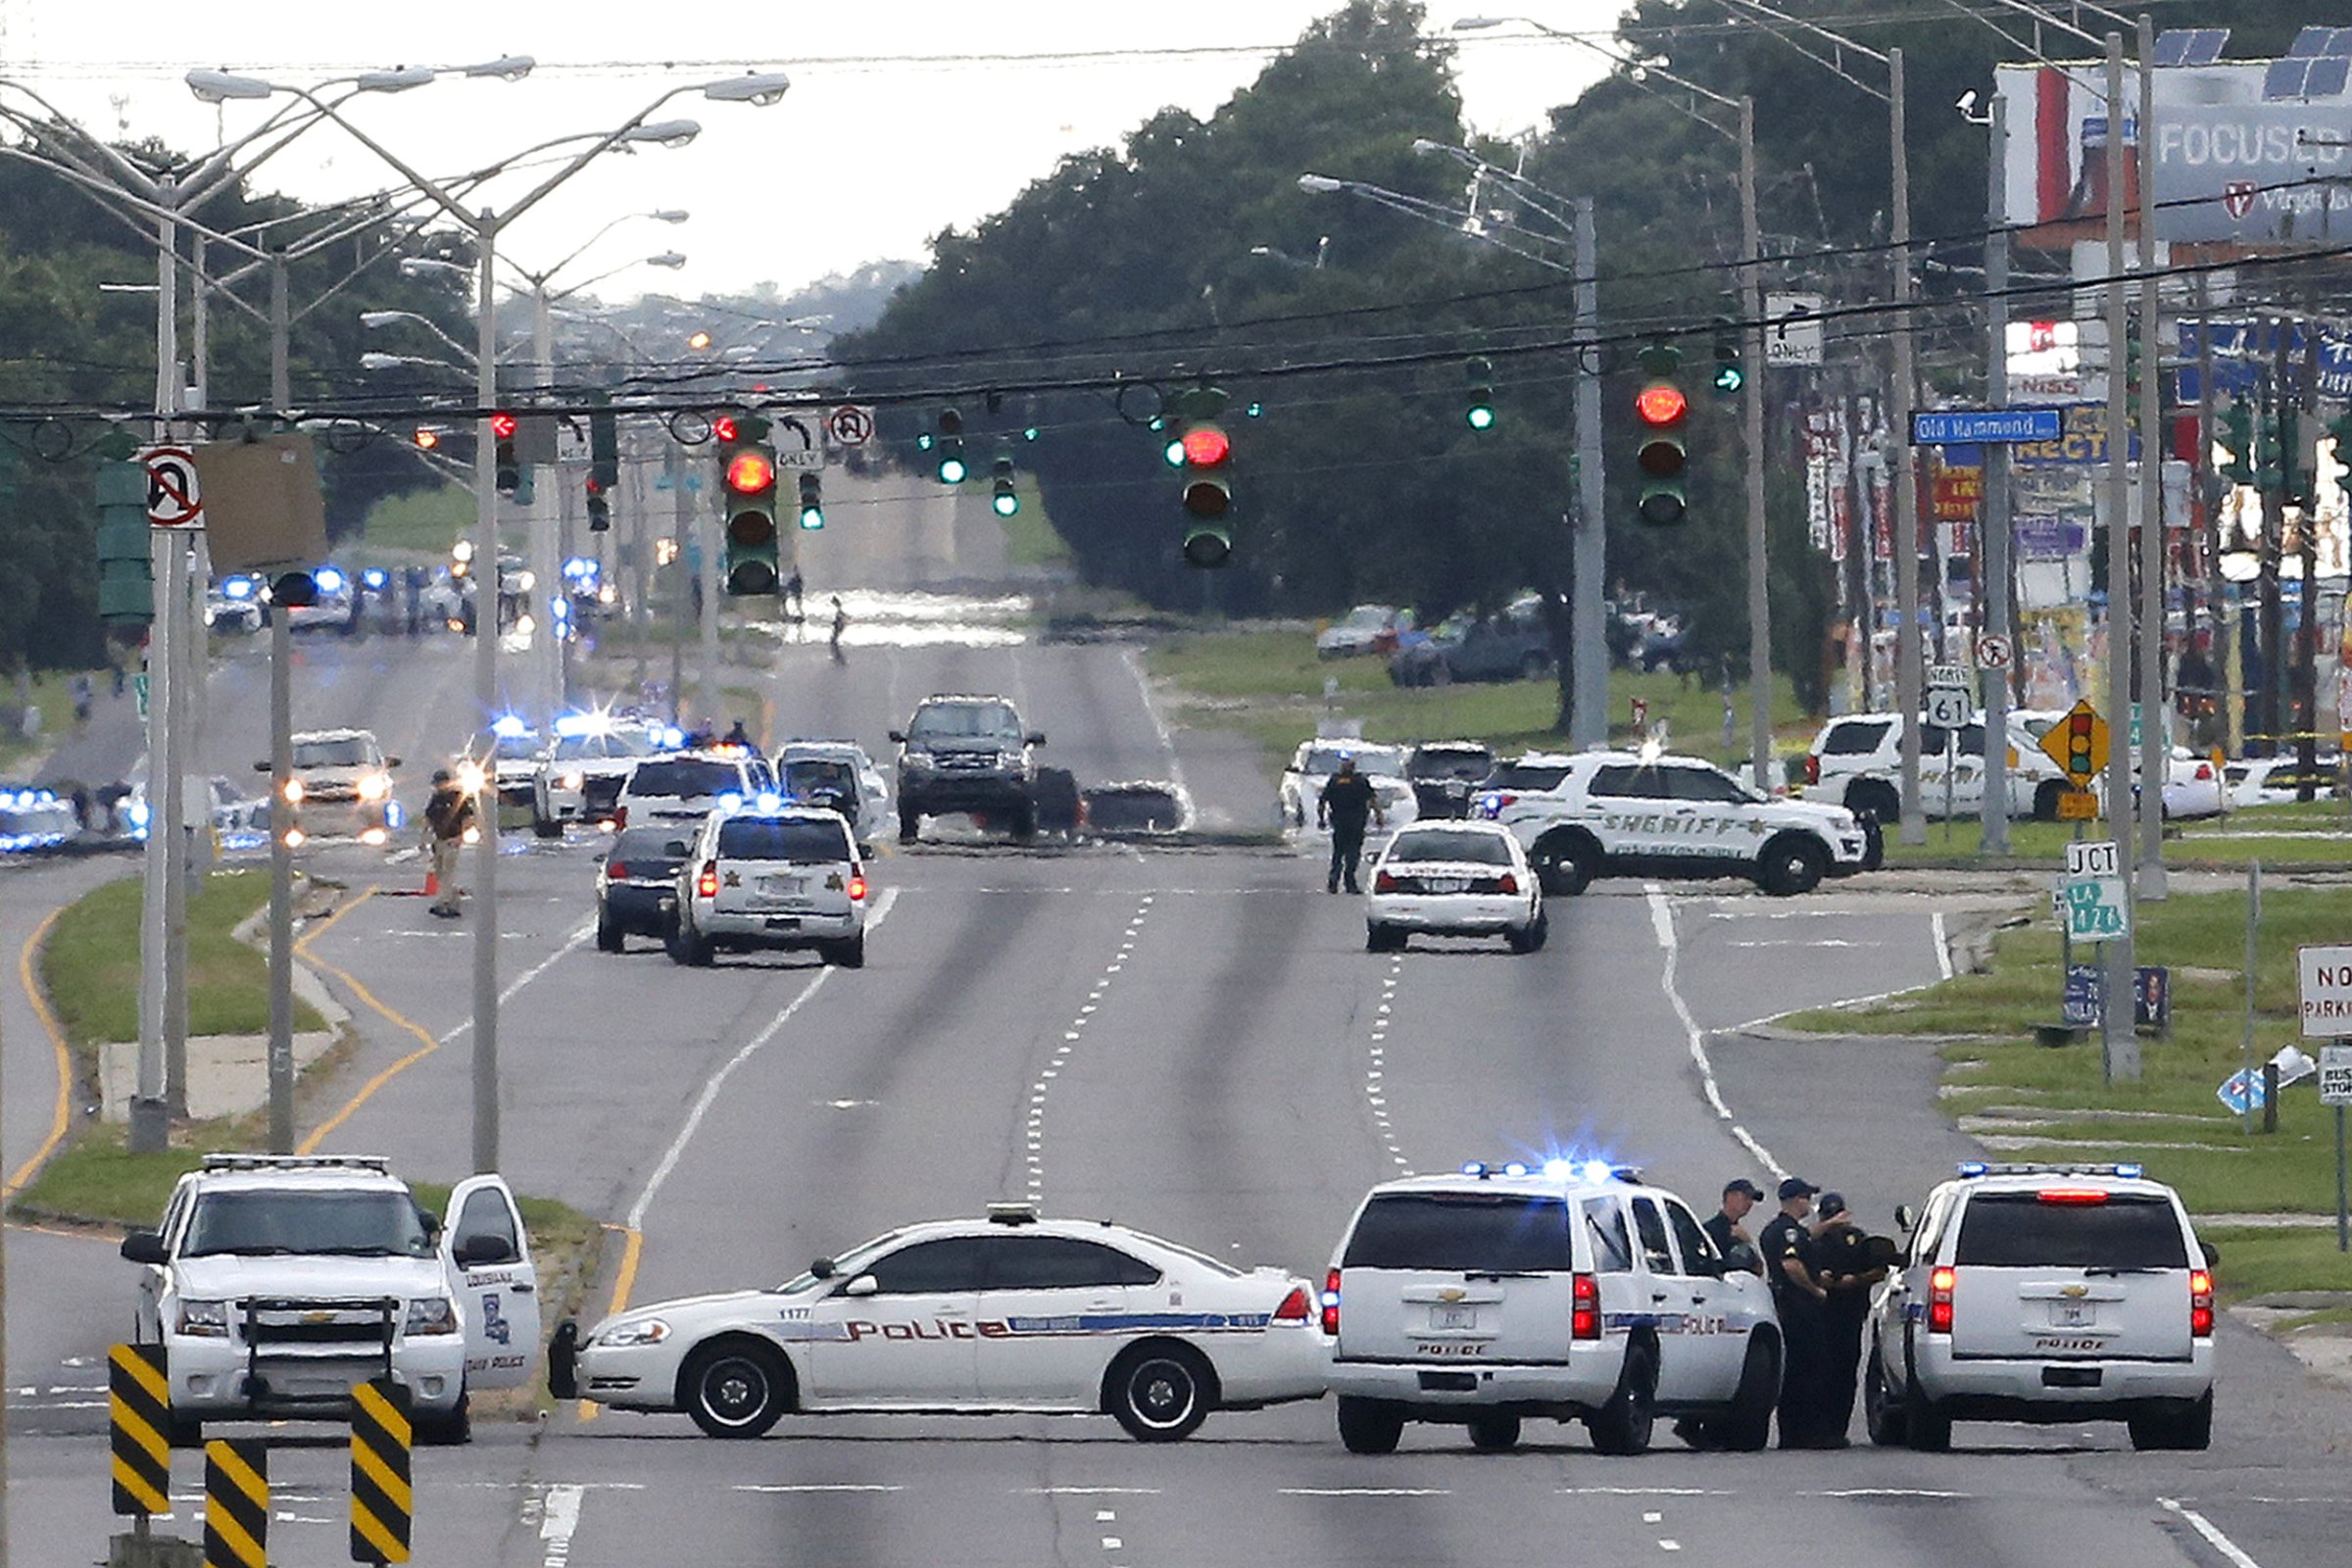 Law enforcement vehicles block access to Airline Highway near the scene of a fatal shooting of police officers in Baton Rouge